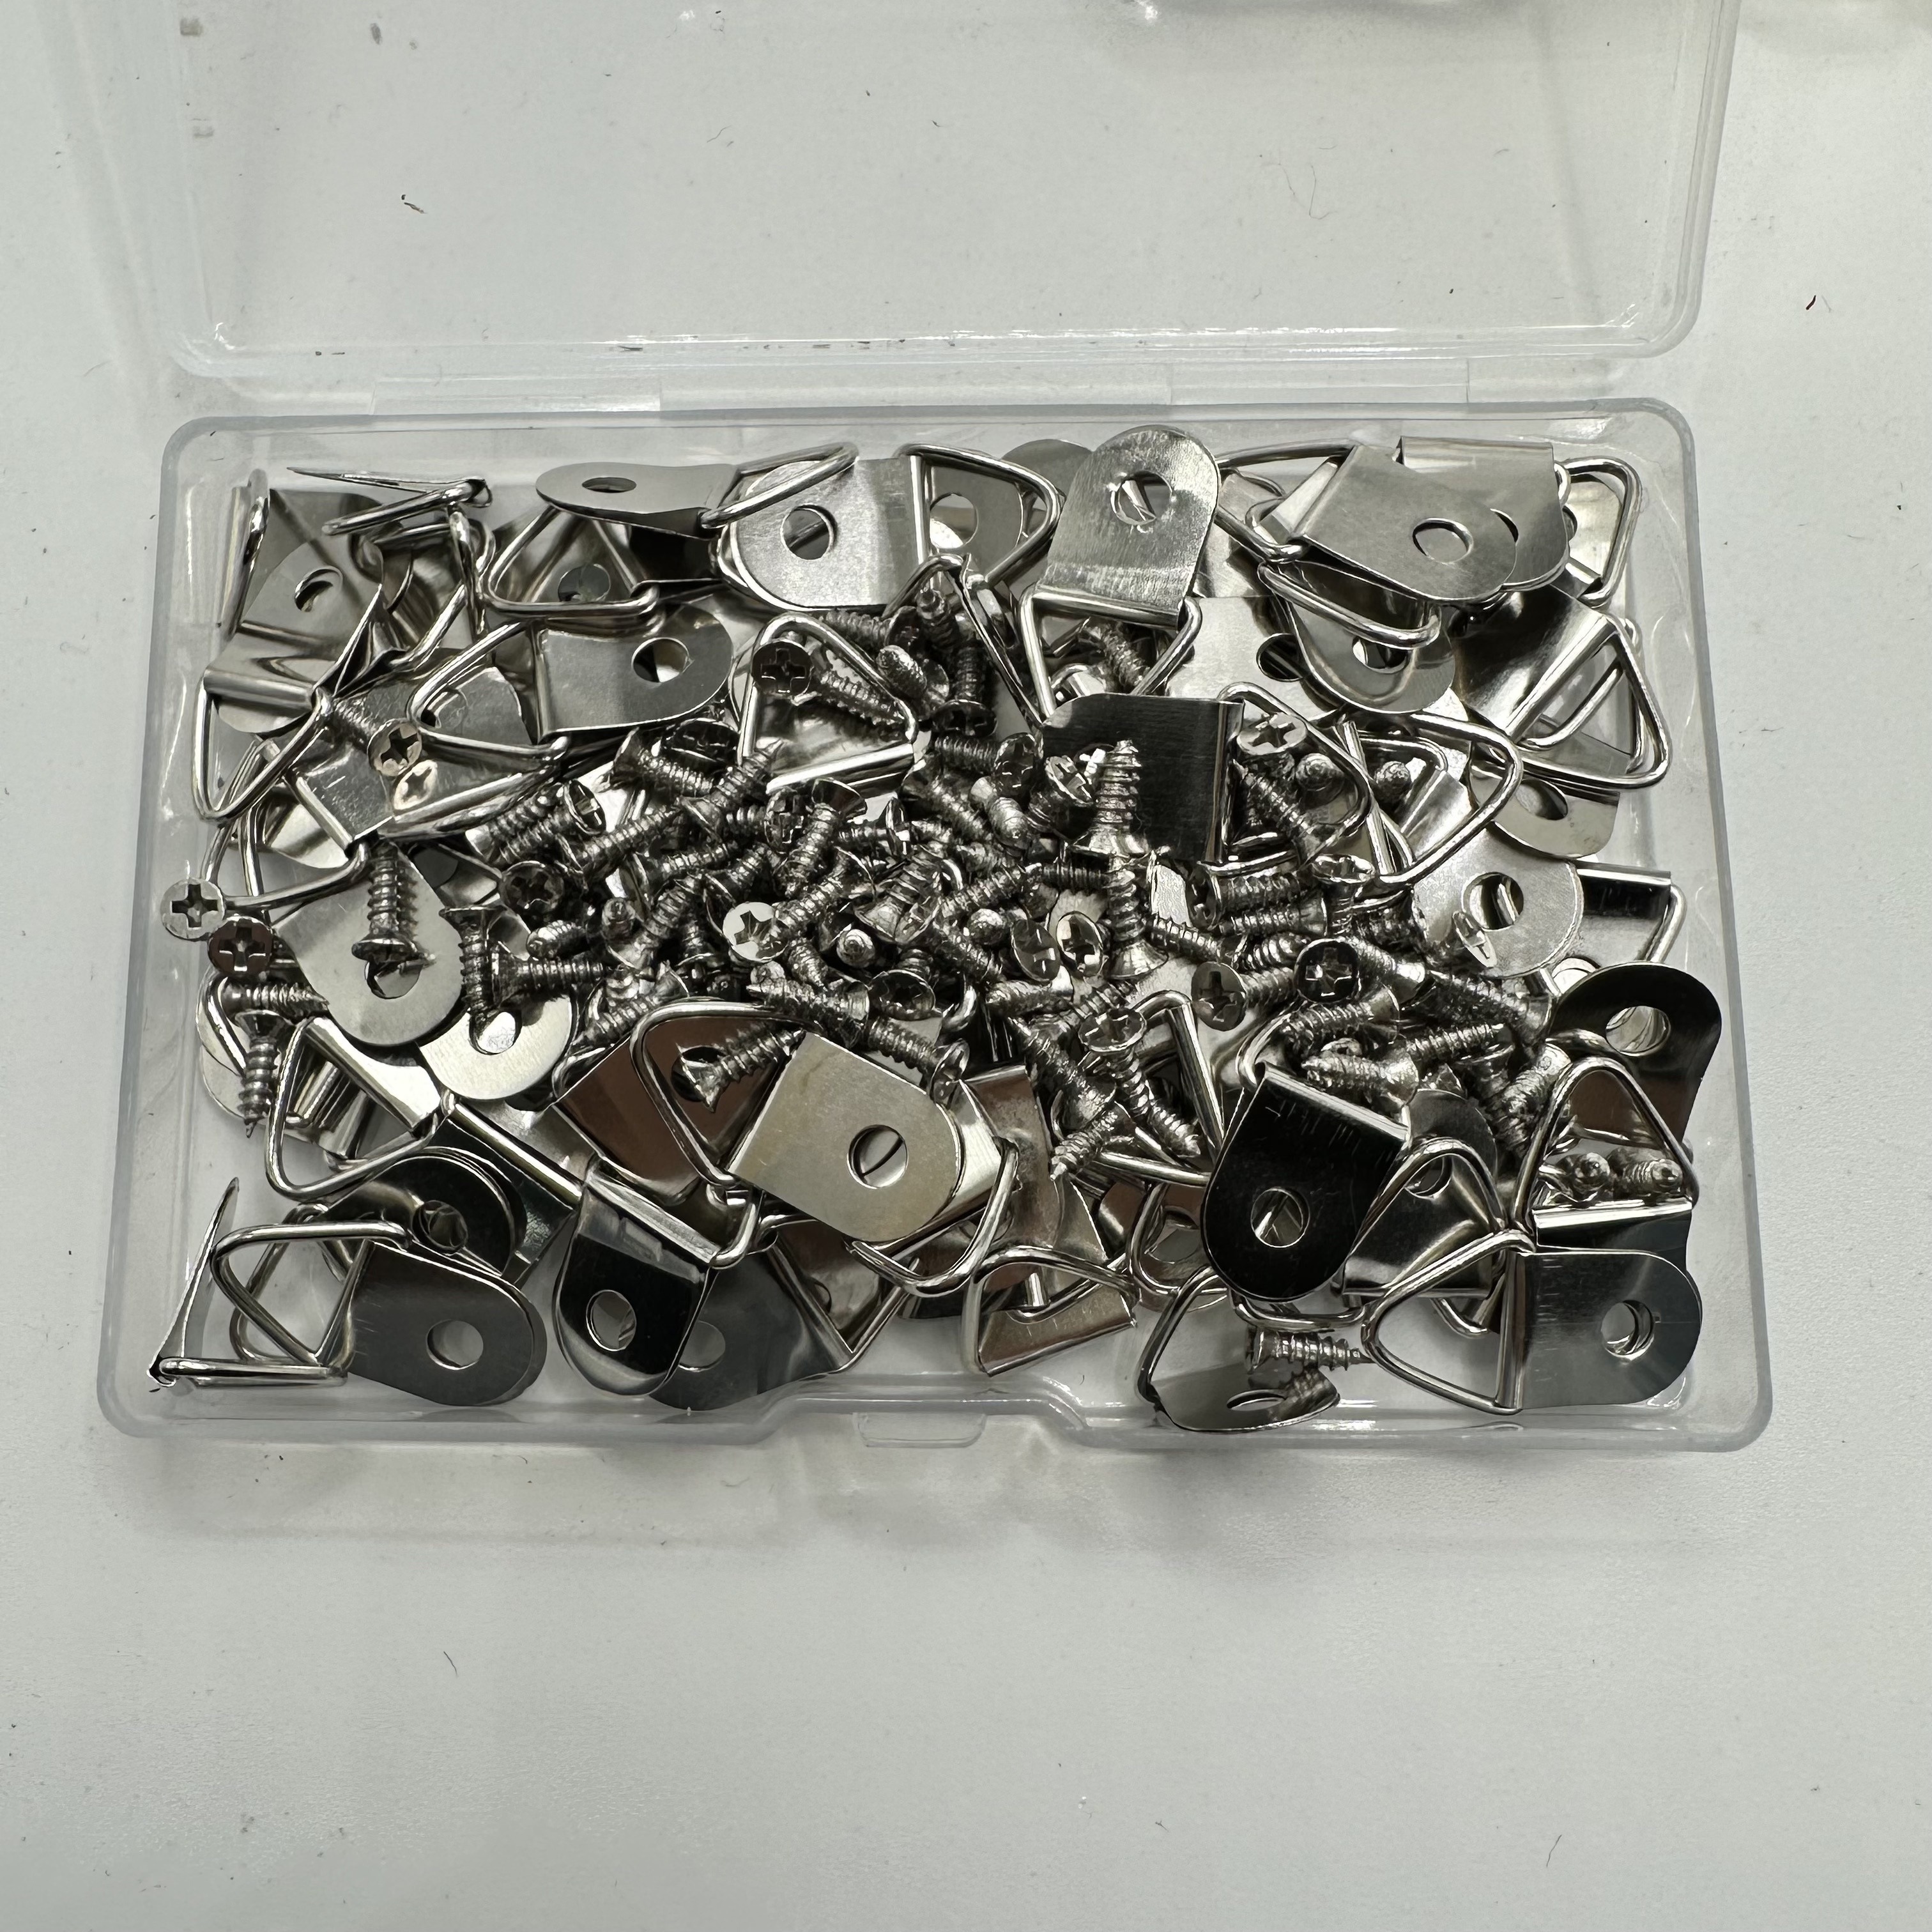 50 Pcs Hook Fastening Buckle Plastic Hooks For Hanging Accessories